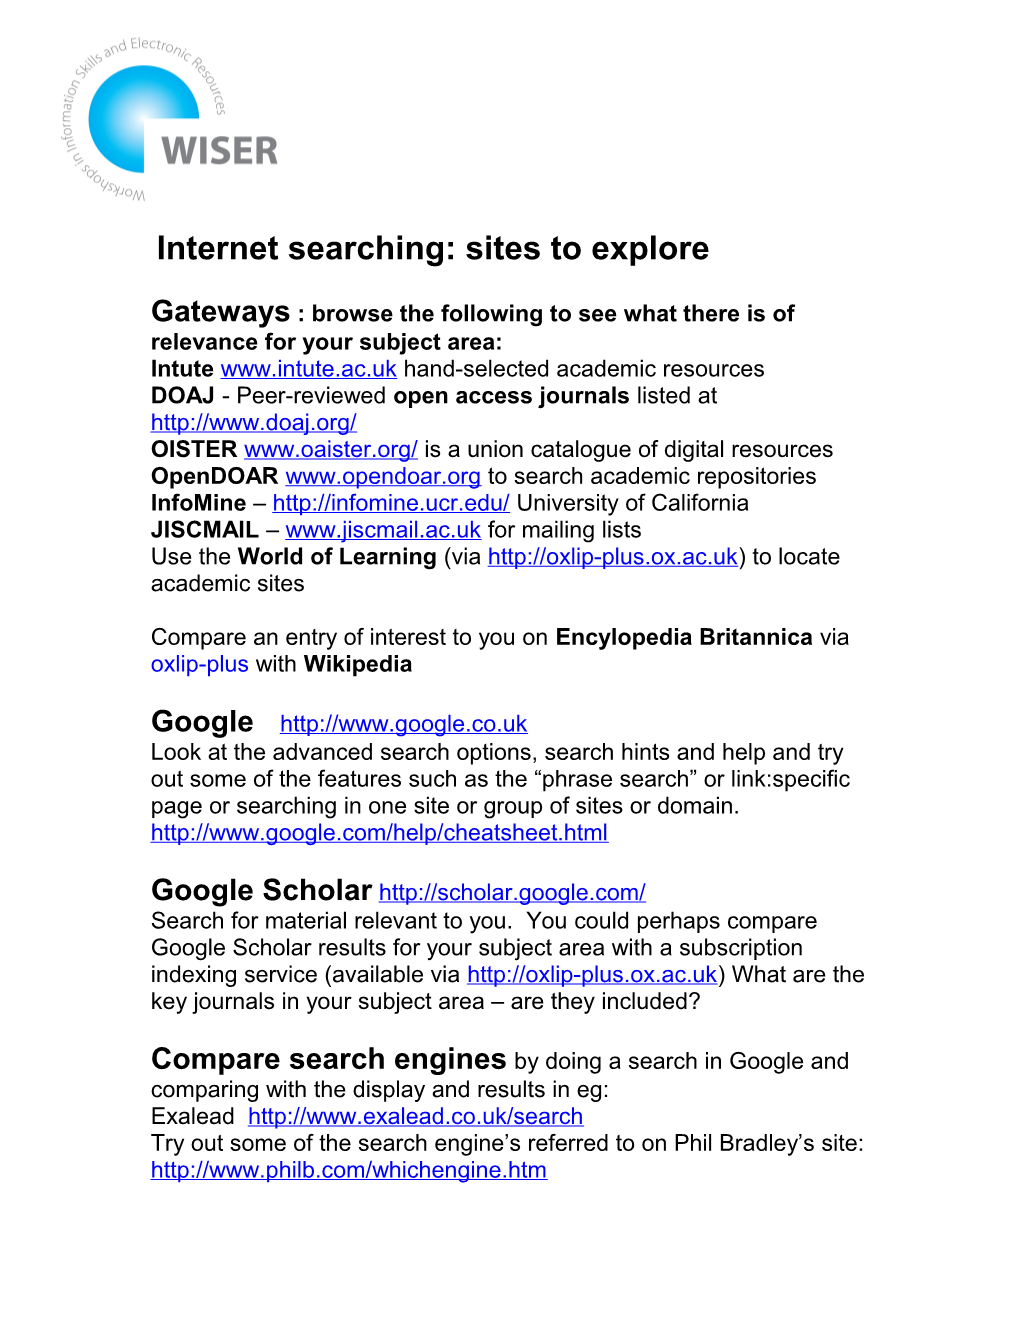 Internet Searching: Sites to Explore